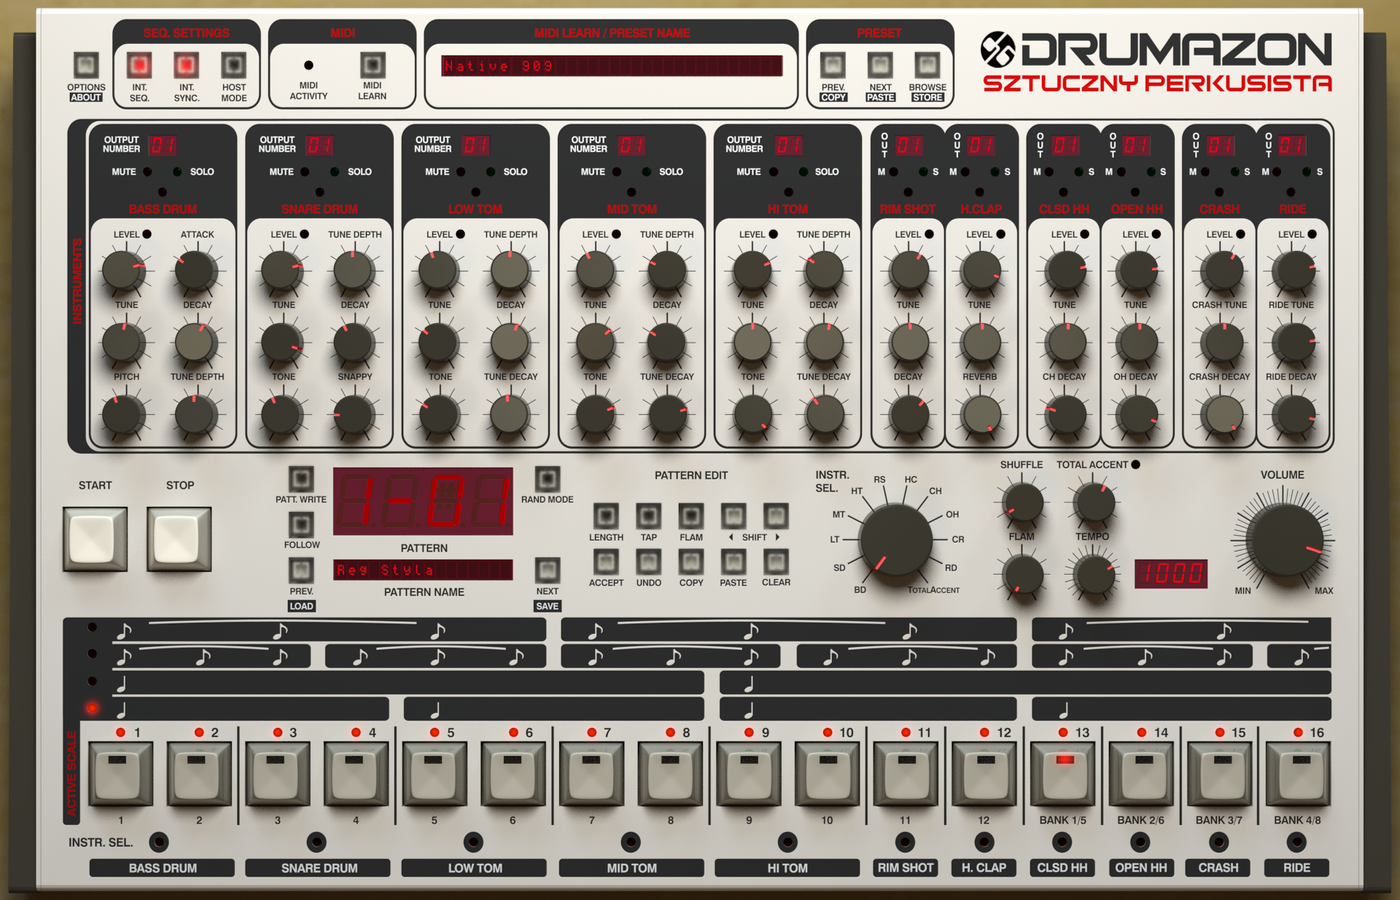 D16 Group | Classic Boxes Bundle Plug-in Collection